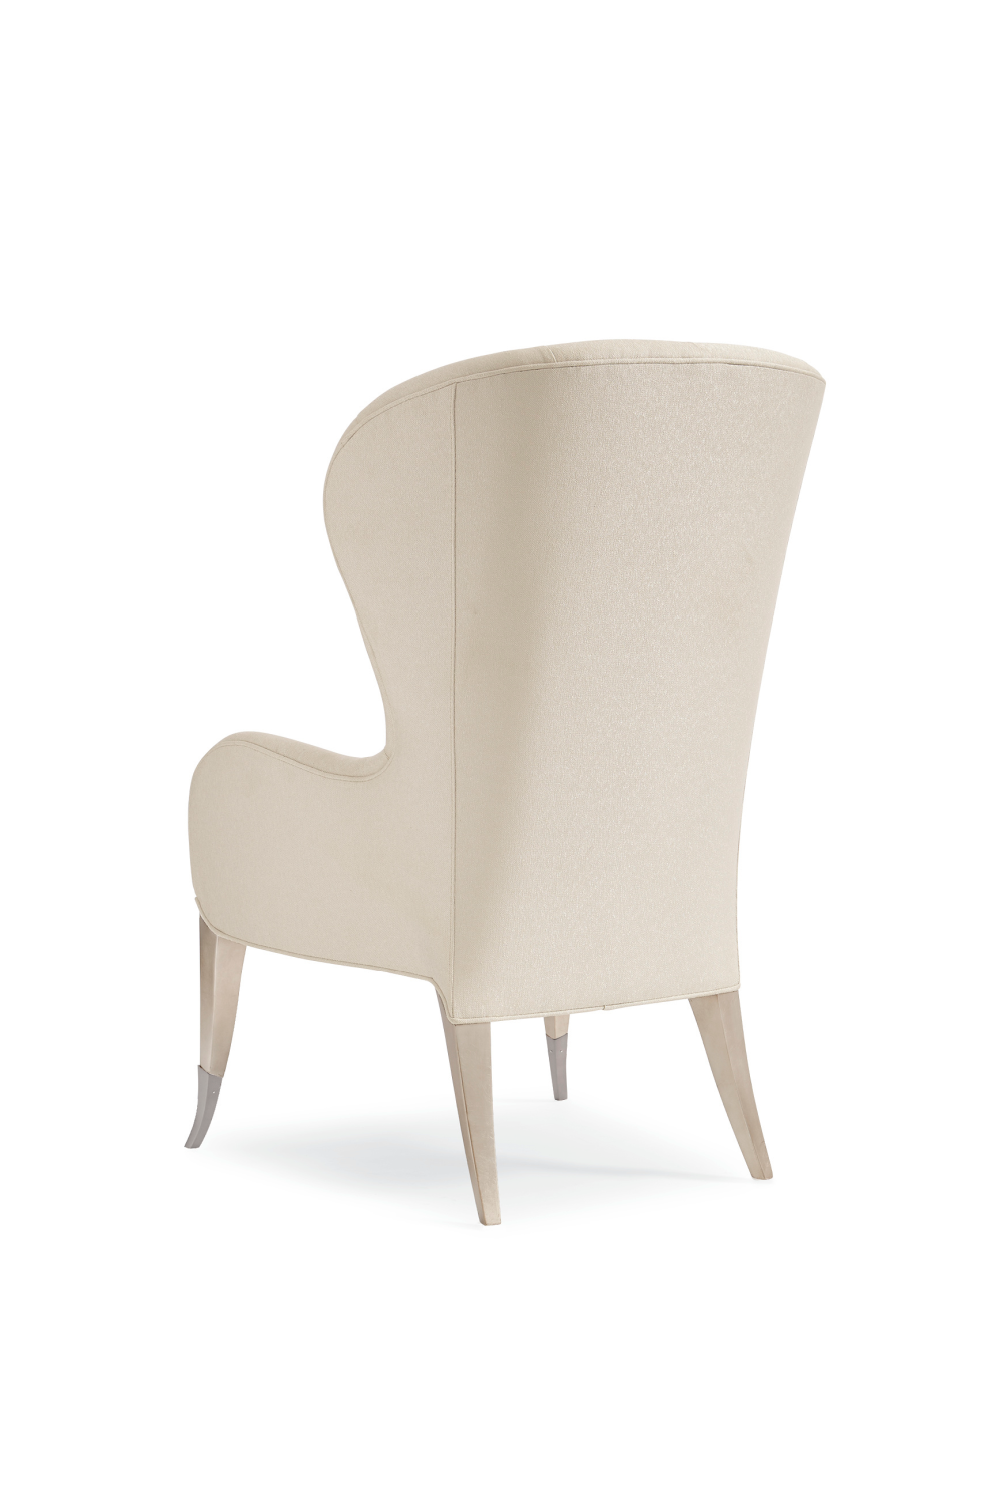  Button Tufted Occassional Chair | Caracole Inside Story | Oroa.com